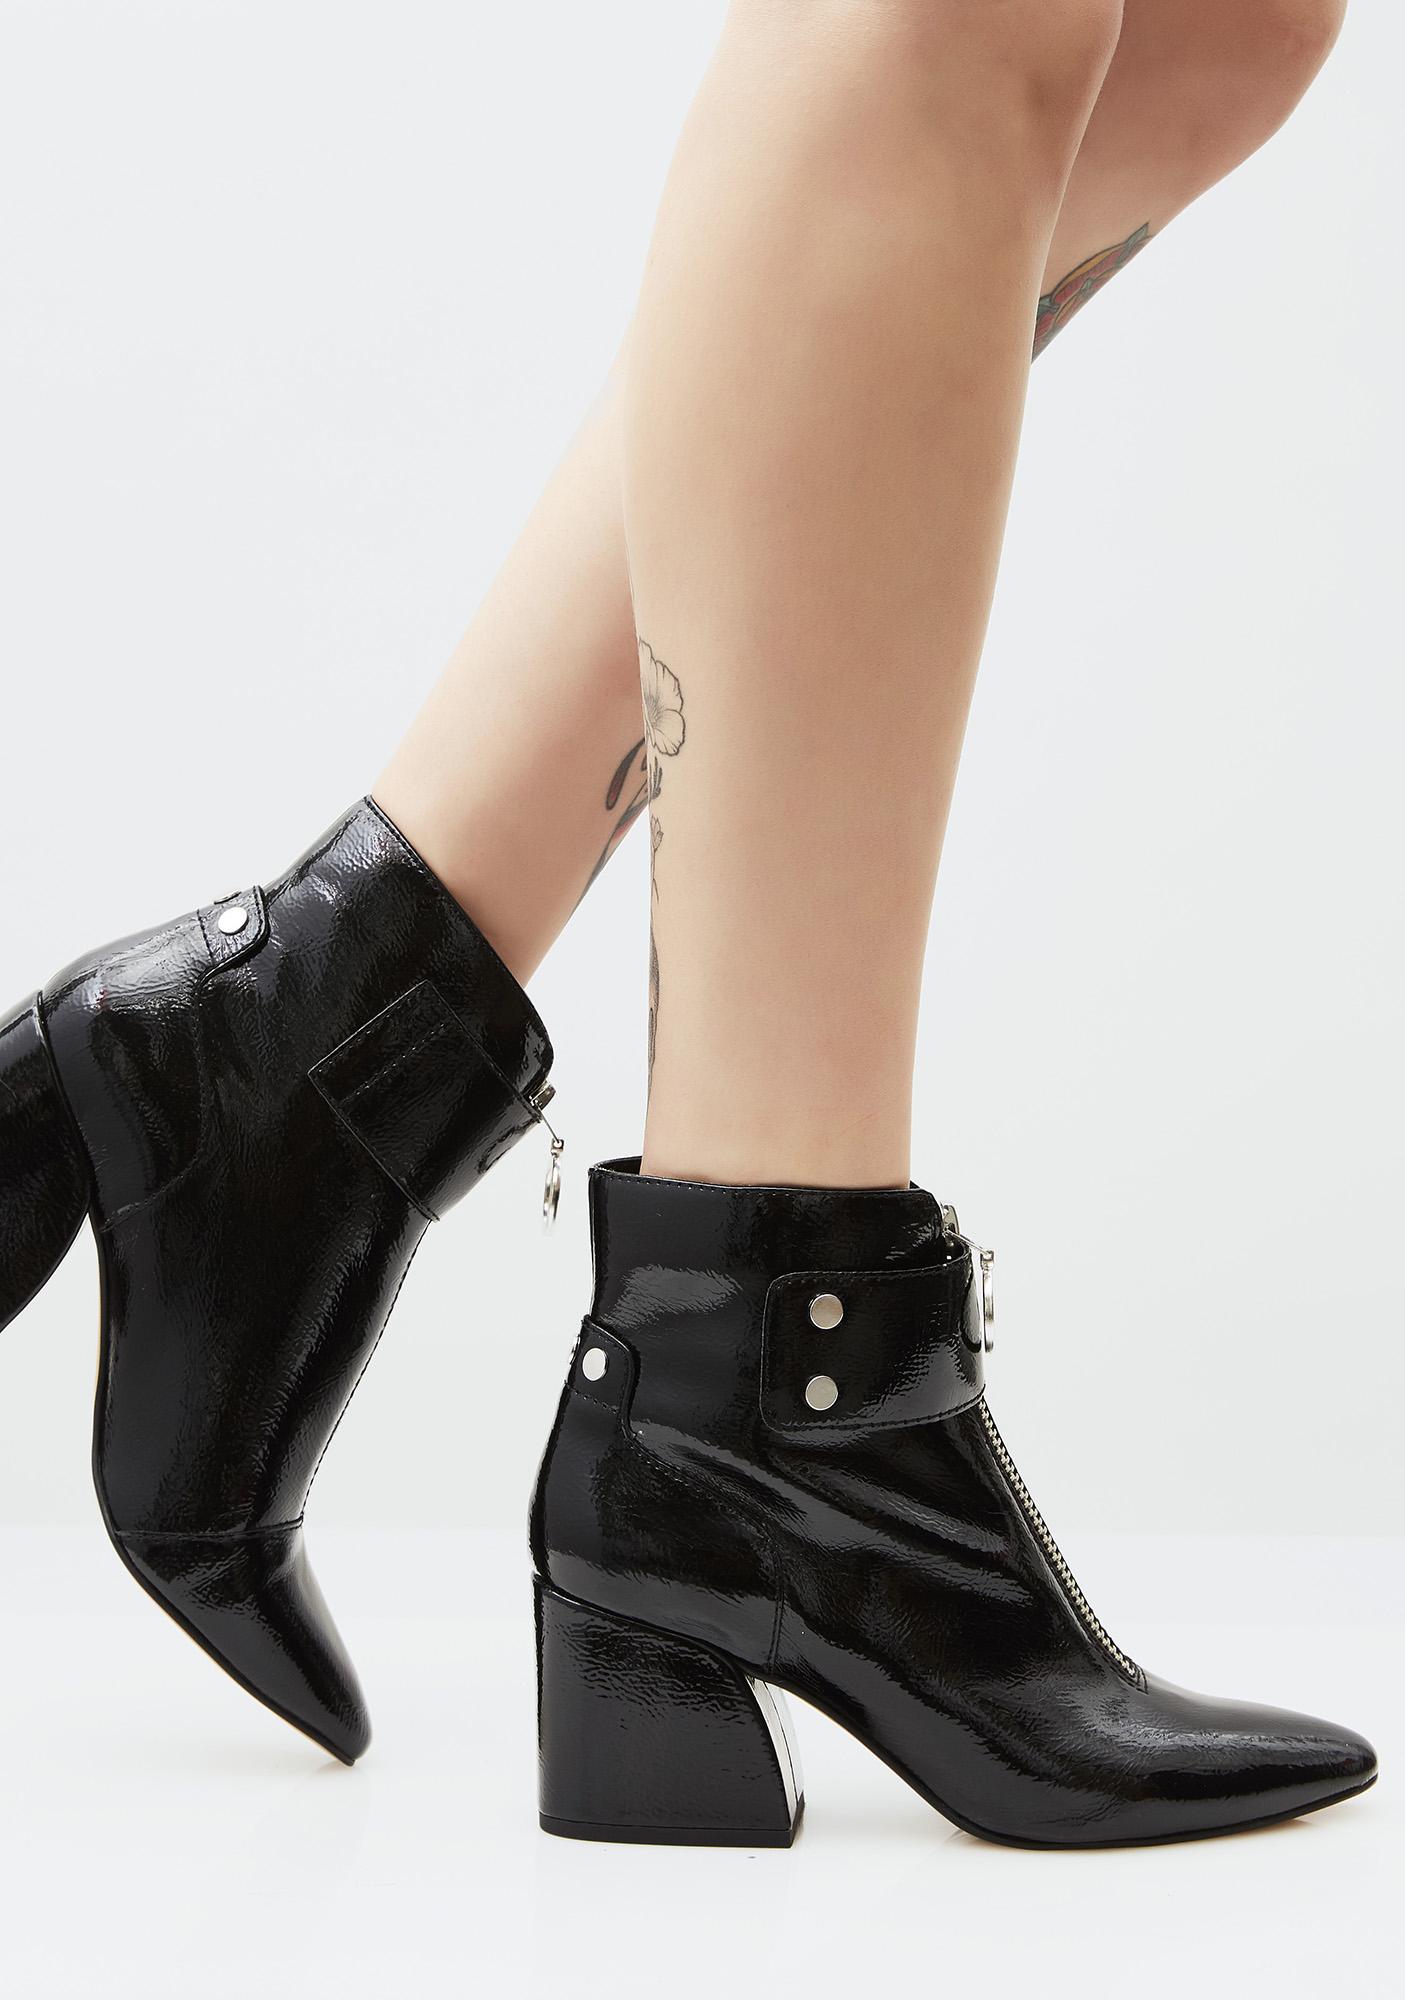 dolce vita patent leather booties